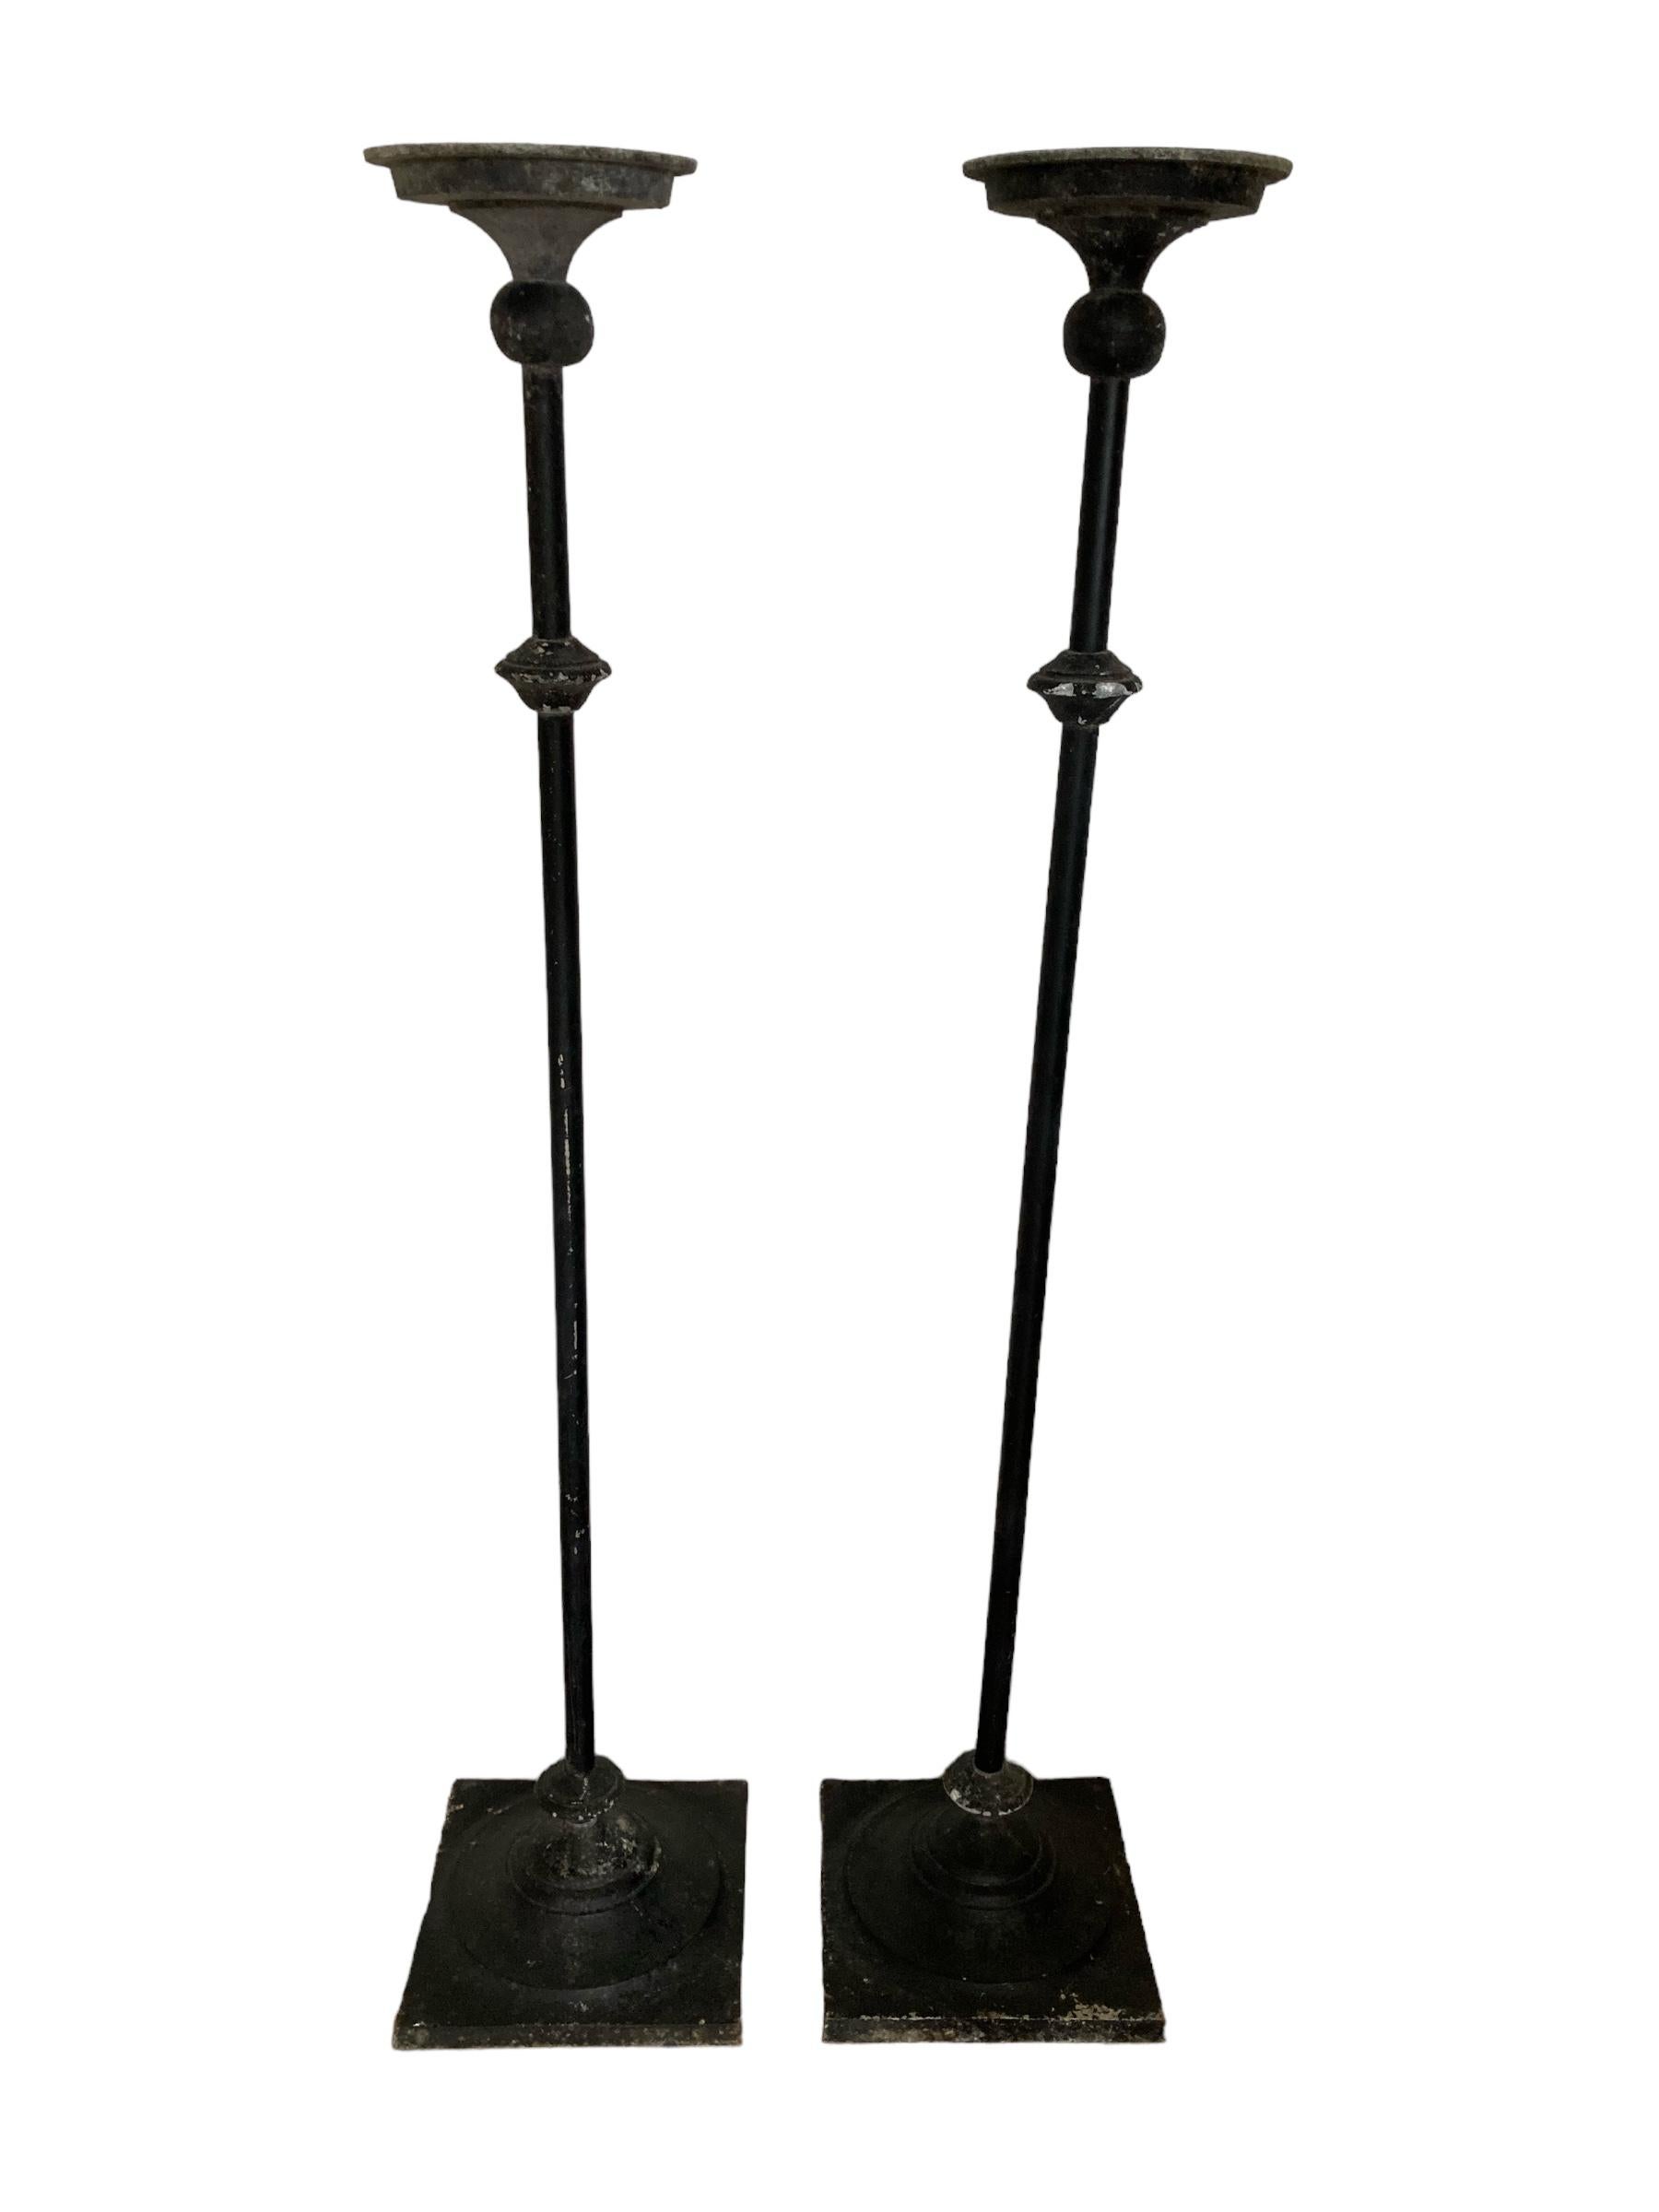 A Pair of Tall Wrought Iron Church Floor Candle Holders Gothic Style For Sale 3